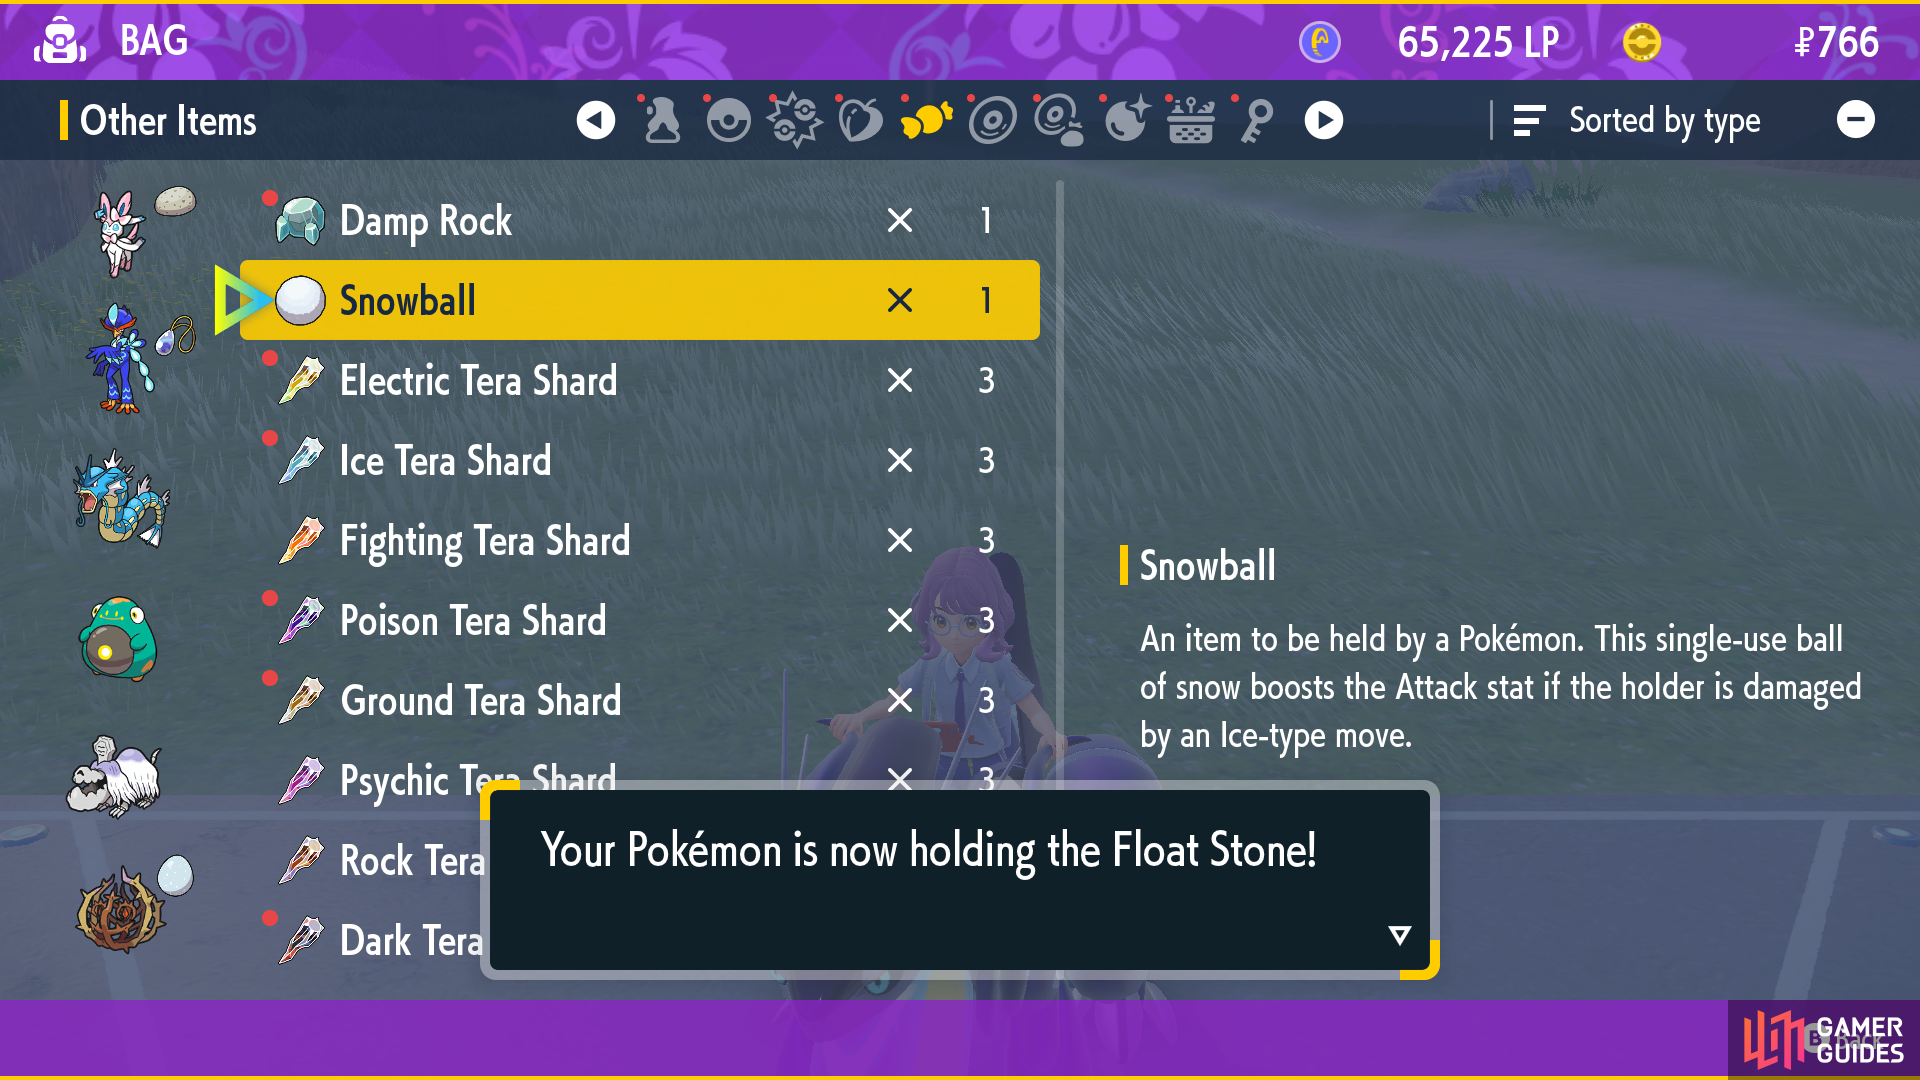 A Pokemon being equipied with the Float Stone.